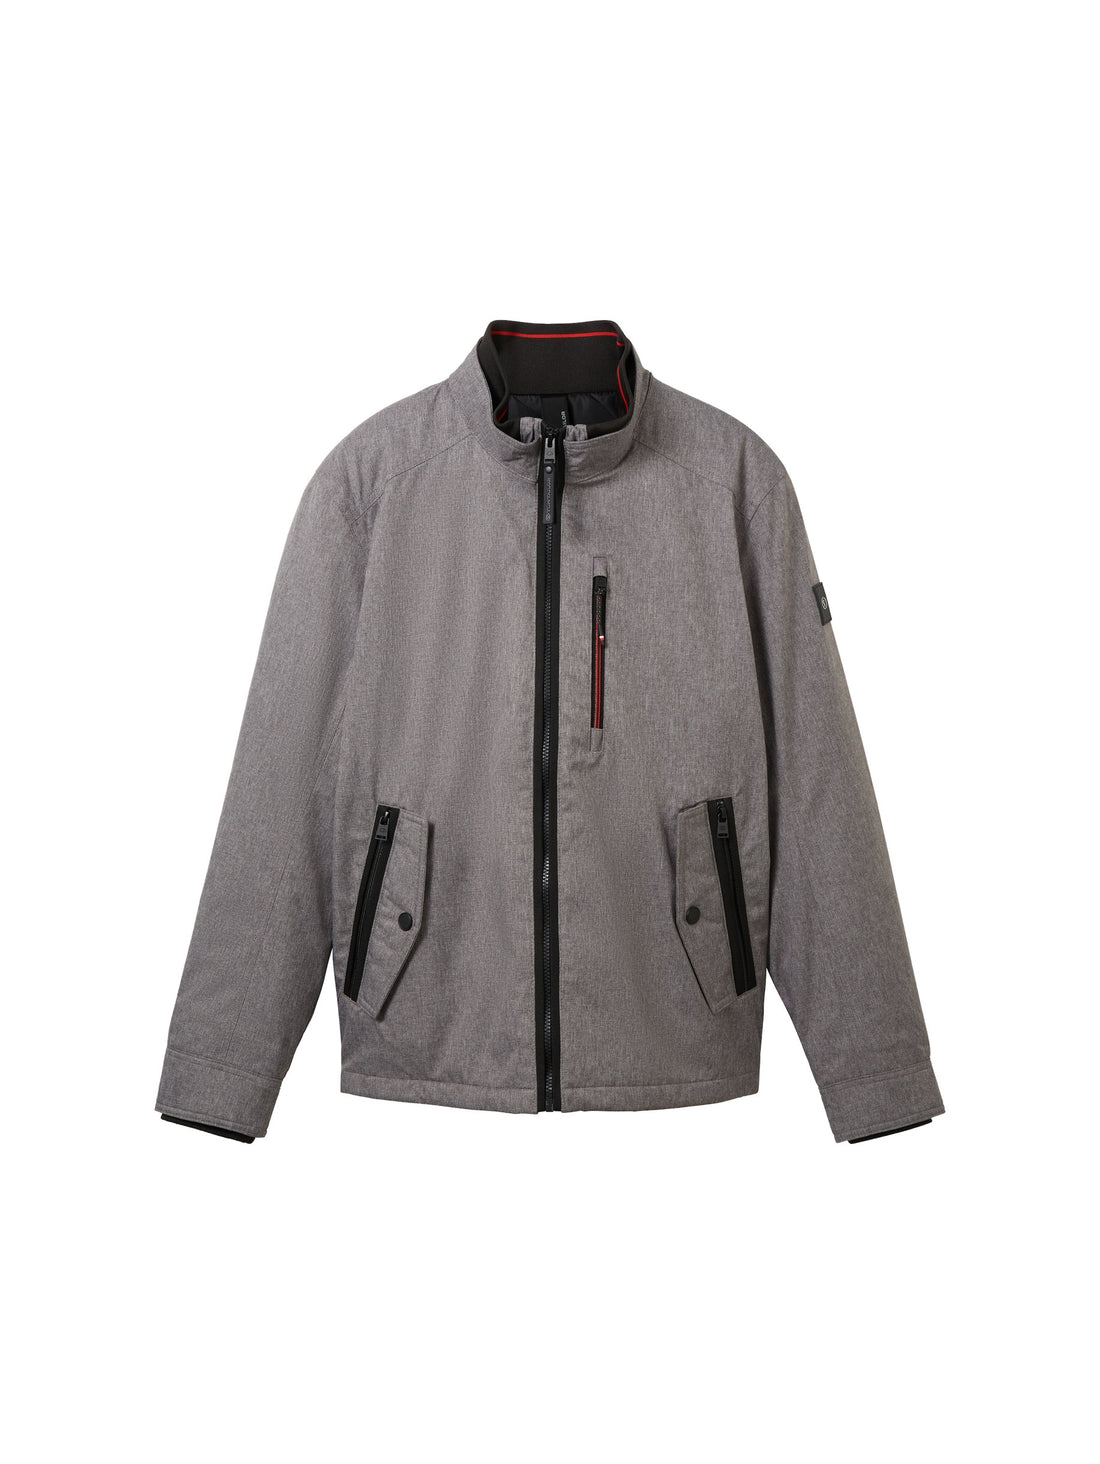 Padded Jacket With Multiple Pockets_1037331_18960_01